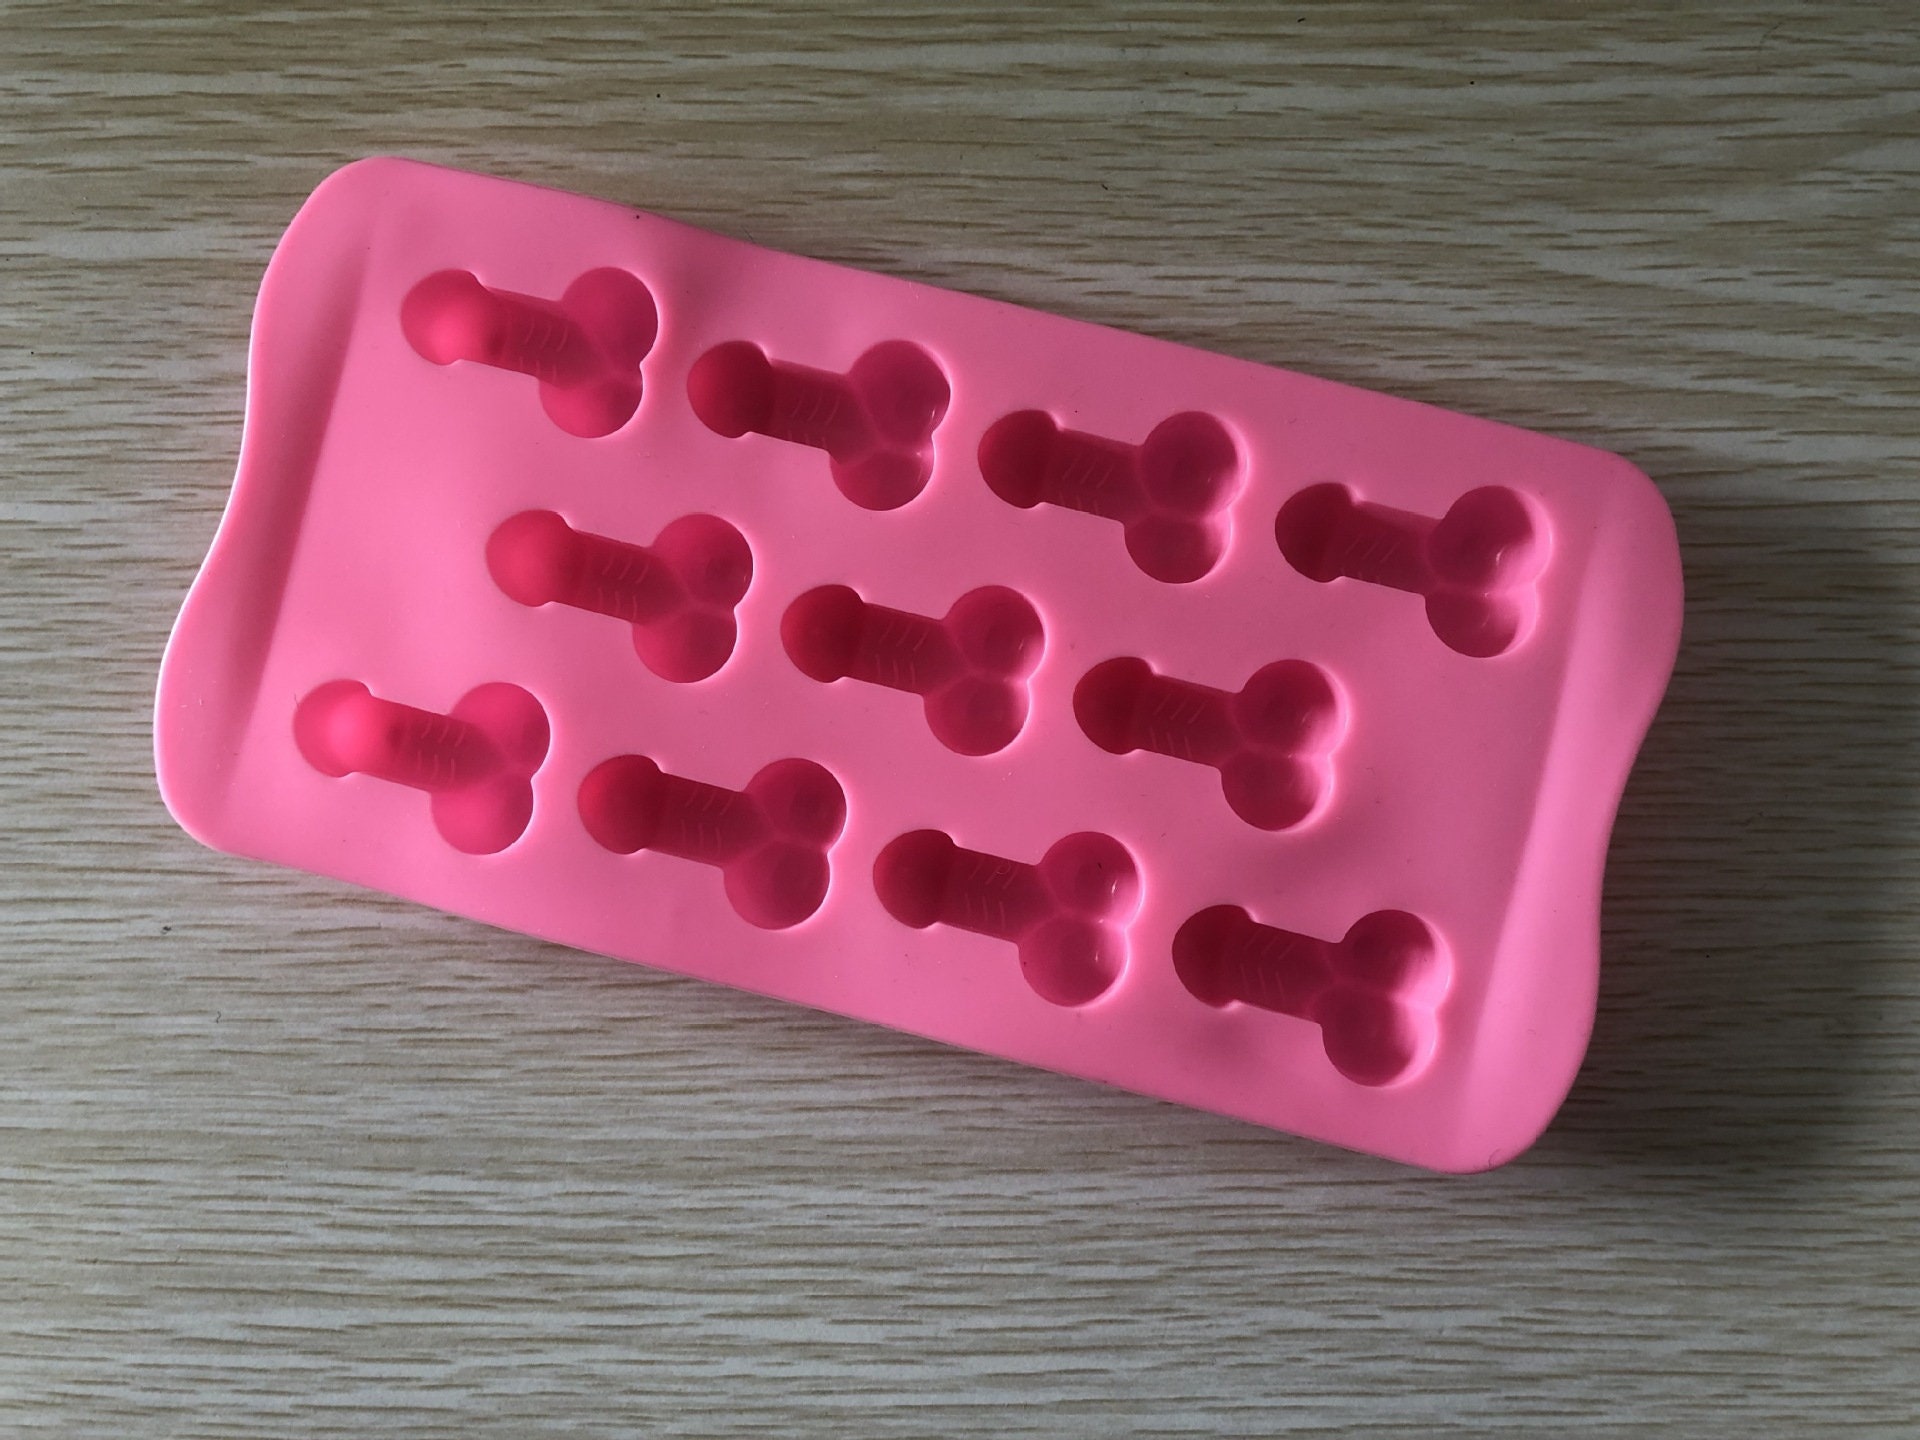 Funny Silicone Ice Cube Tray prank Mold Night Party Ice Maker Penis Ice Tray